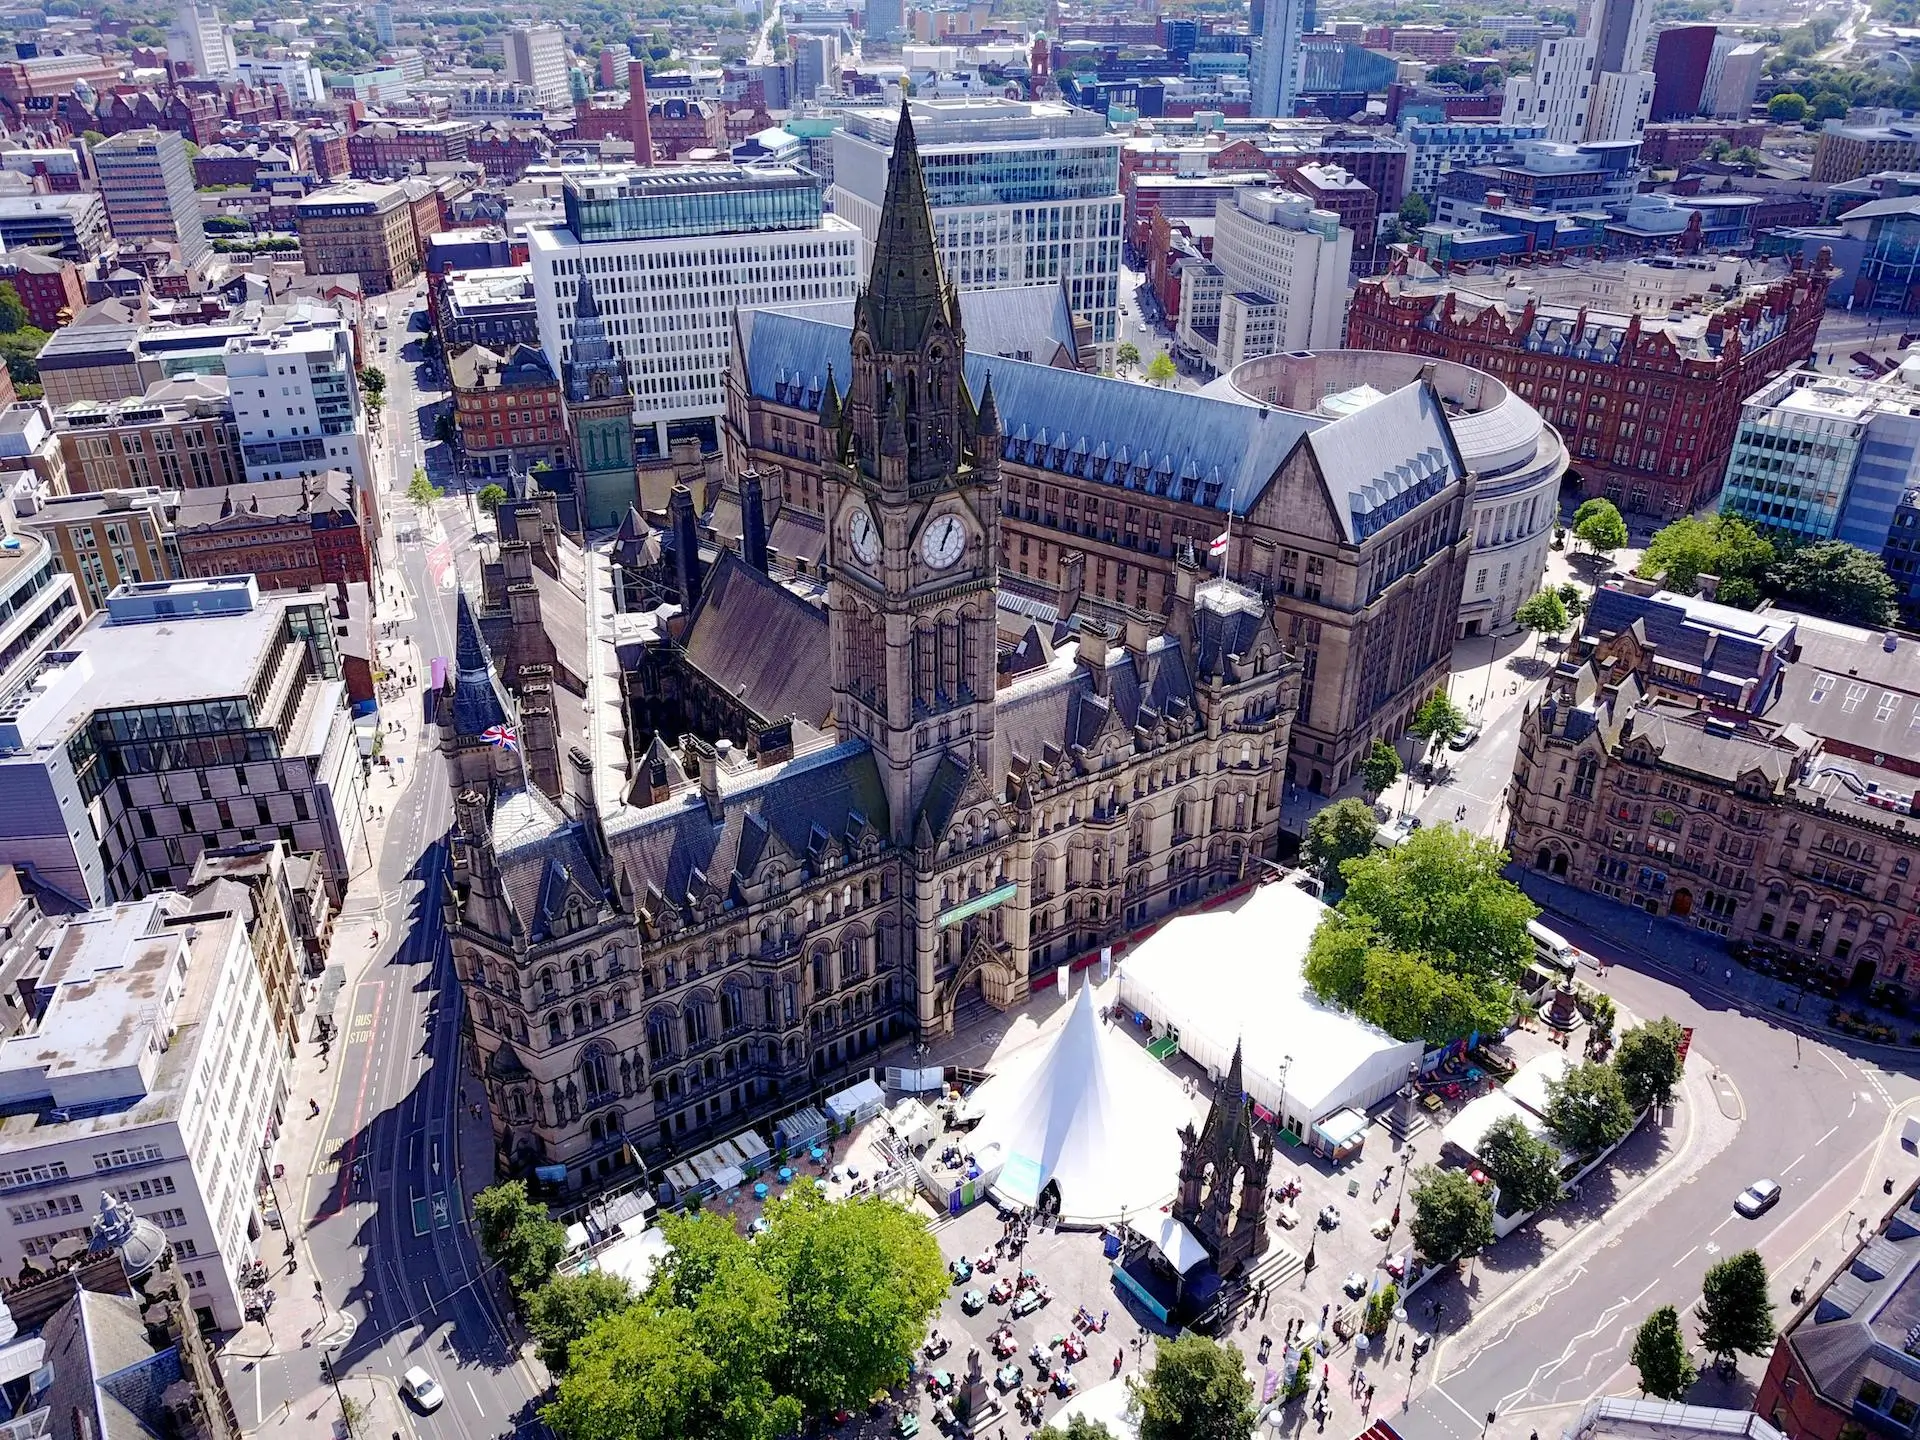 image of manchester city center for a north west healthcare staffing agency